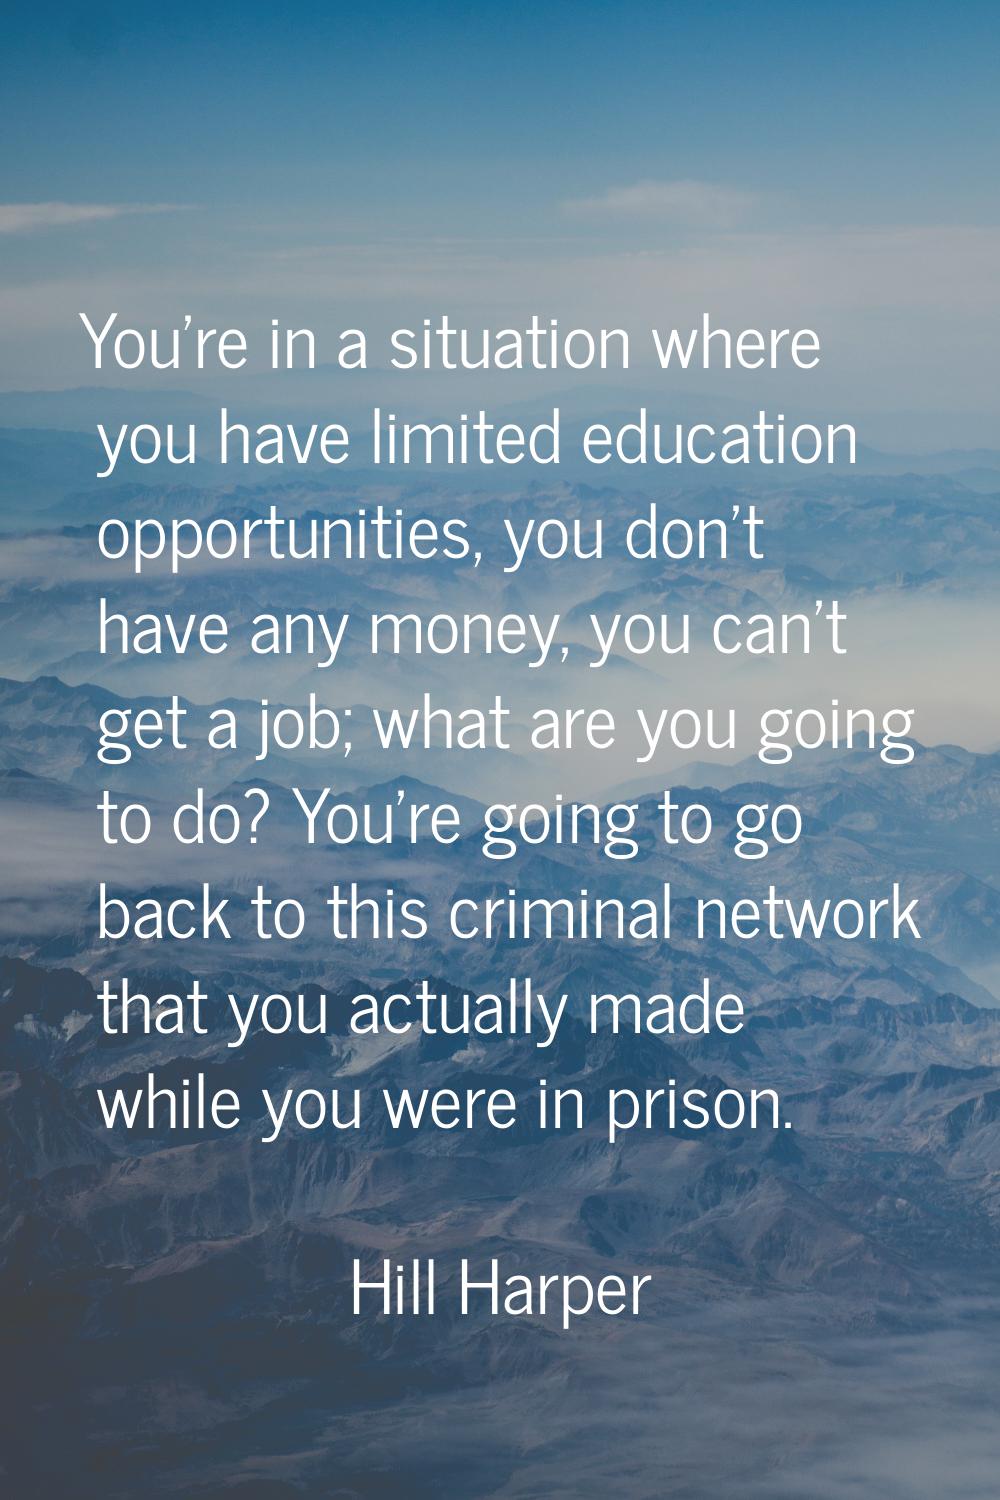 You're in a situation where you have limited education opportunities, you don't have any money, you